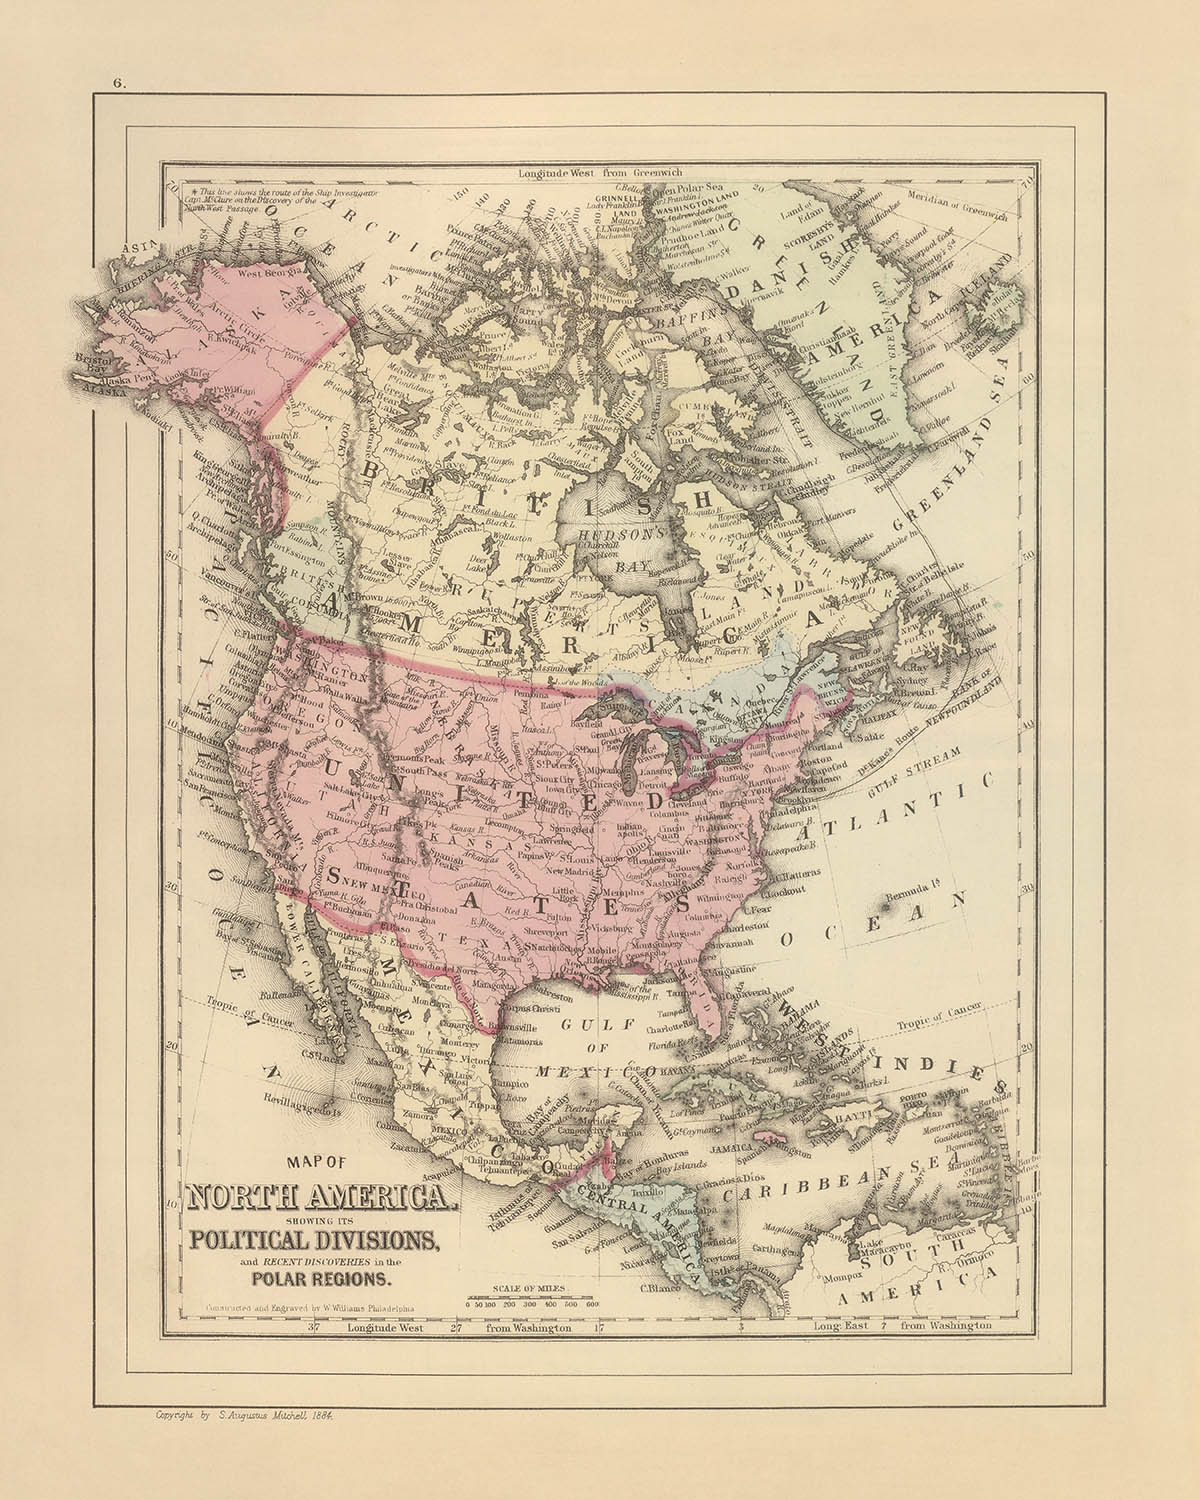 Old Map of North America by Mitchell, 1884: New York, Rocky Mtns, Hudson's Bay, Polar Regions, Mexico City